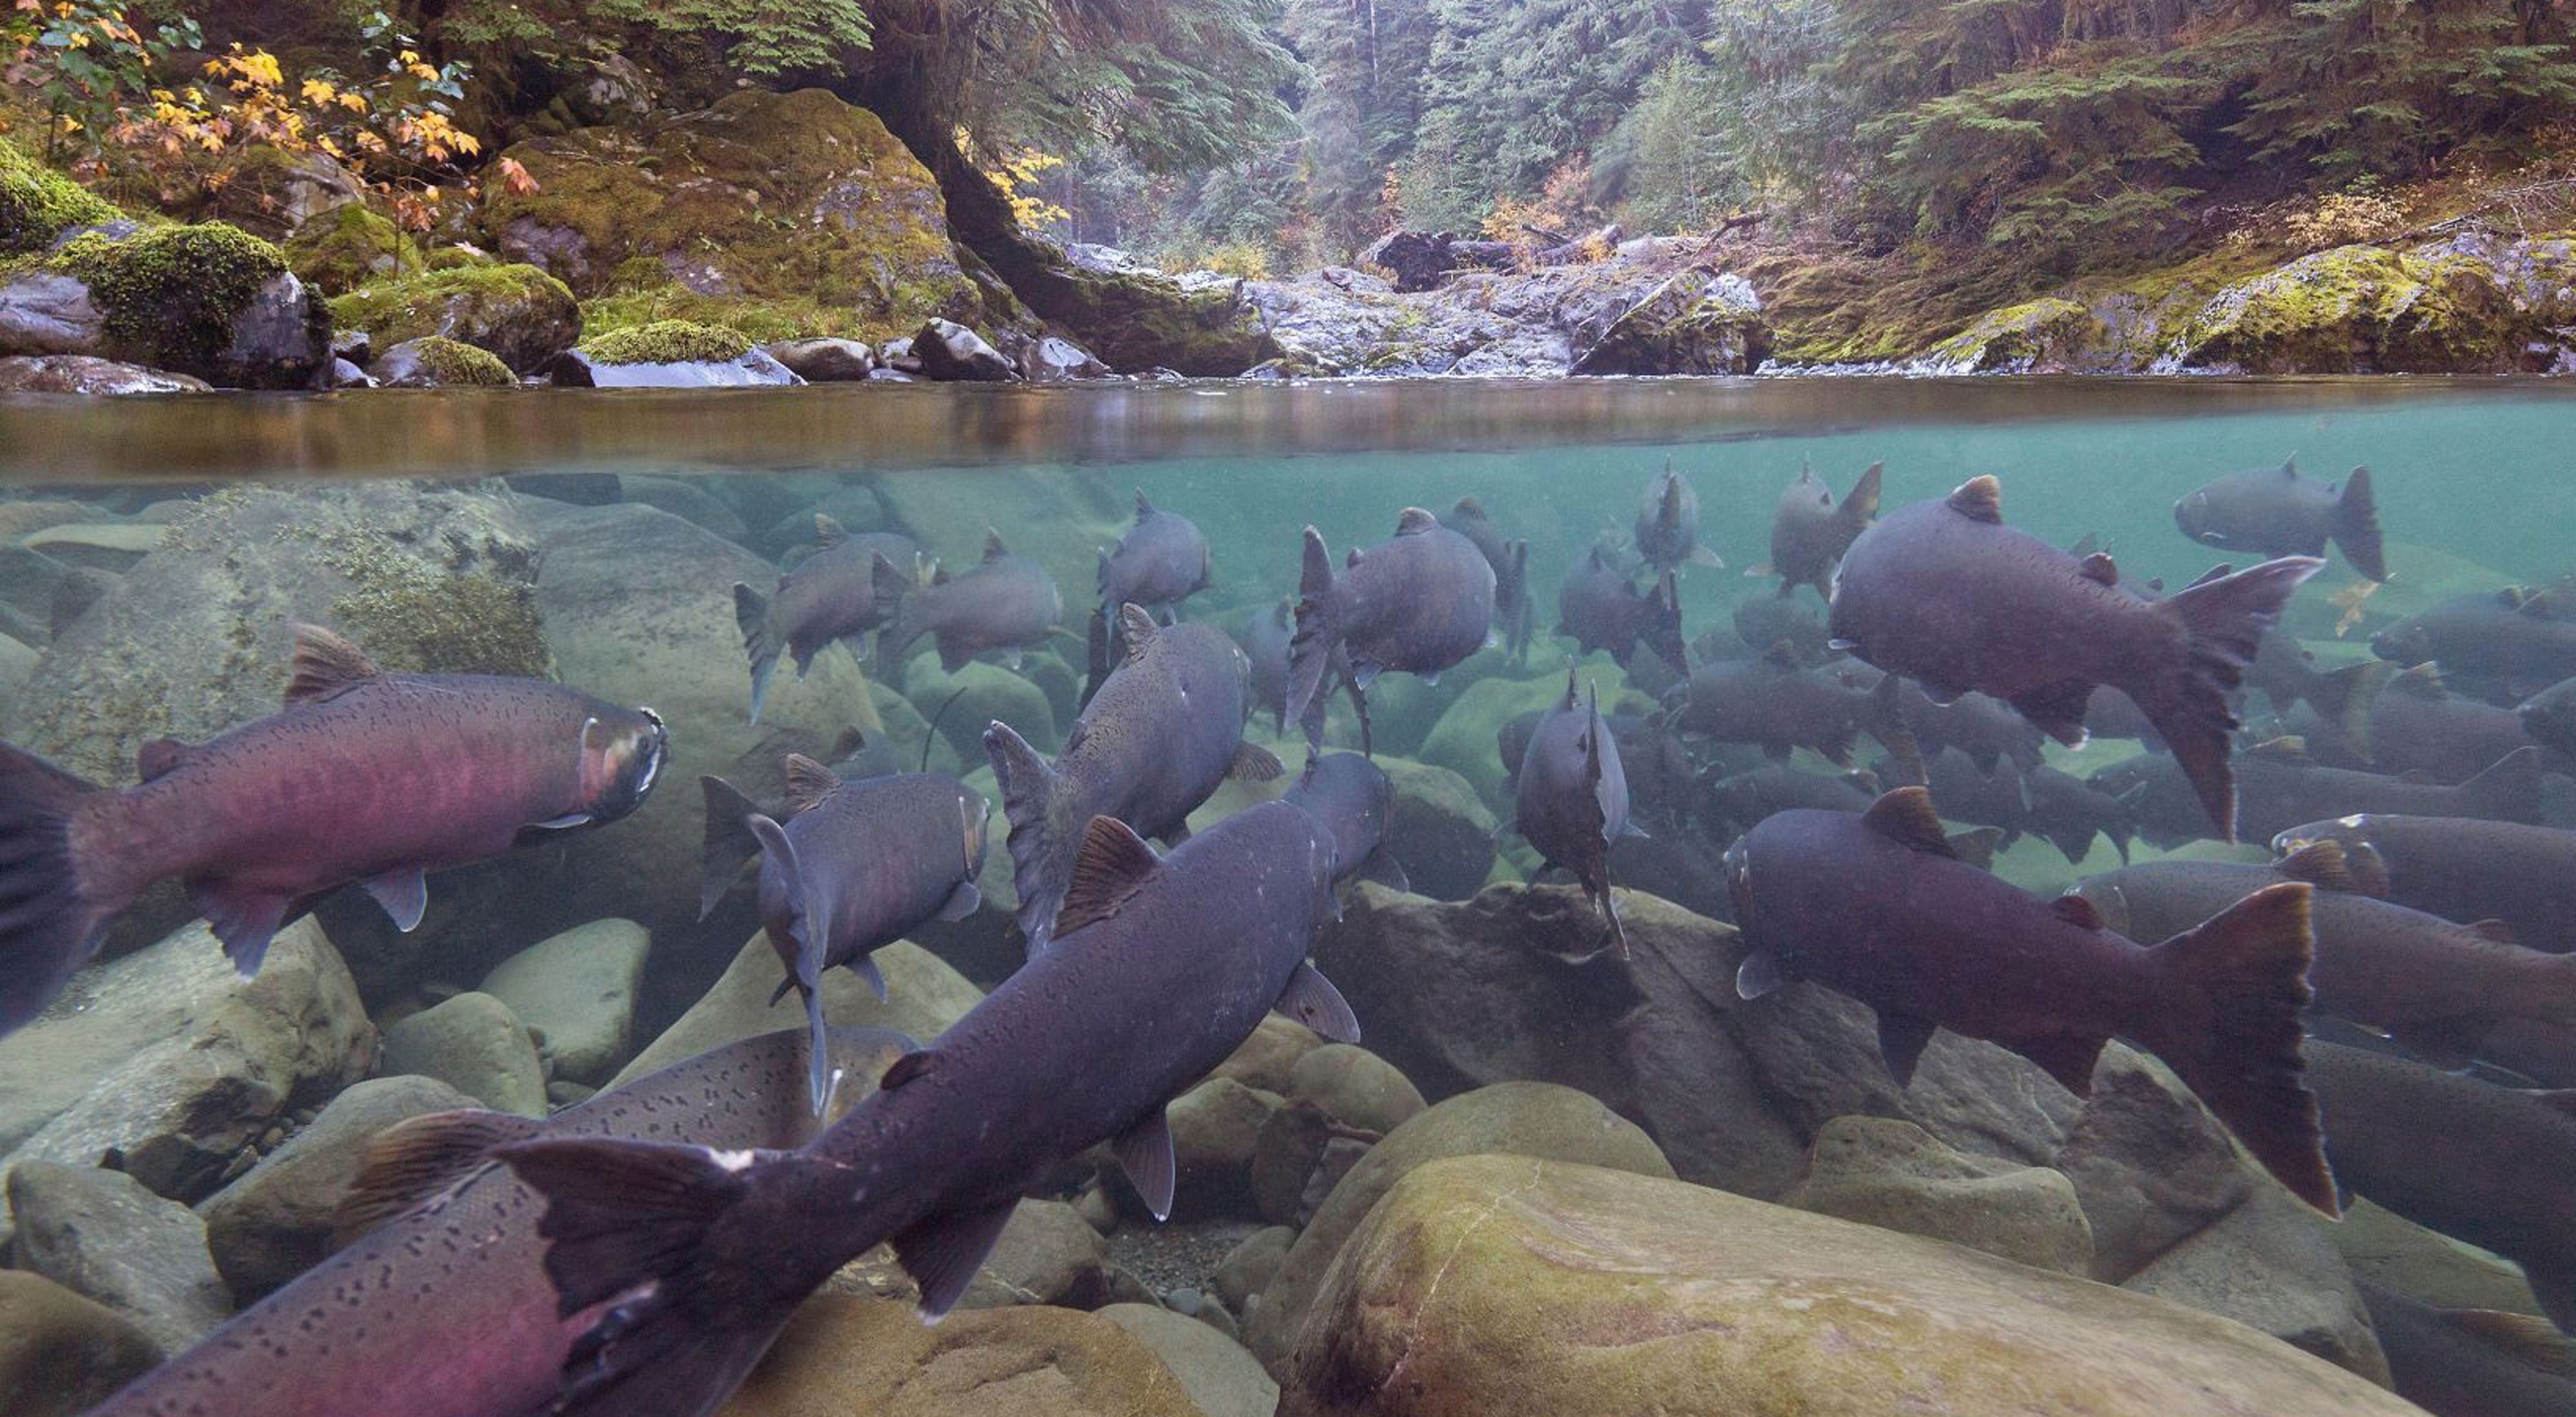 A large school of coho salmon gather near the surface of a pool of water; the camera captures both the underwater scene and the above-water scene showing rocks and trees.